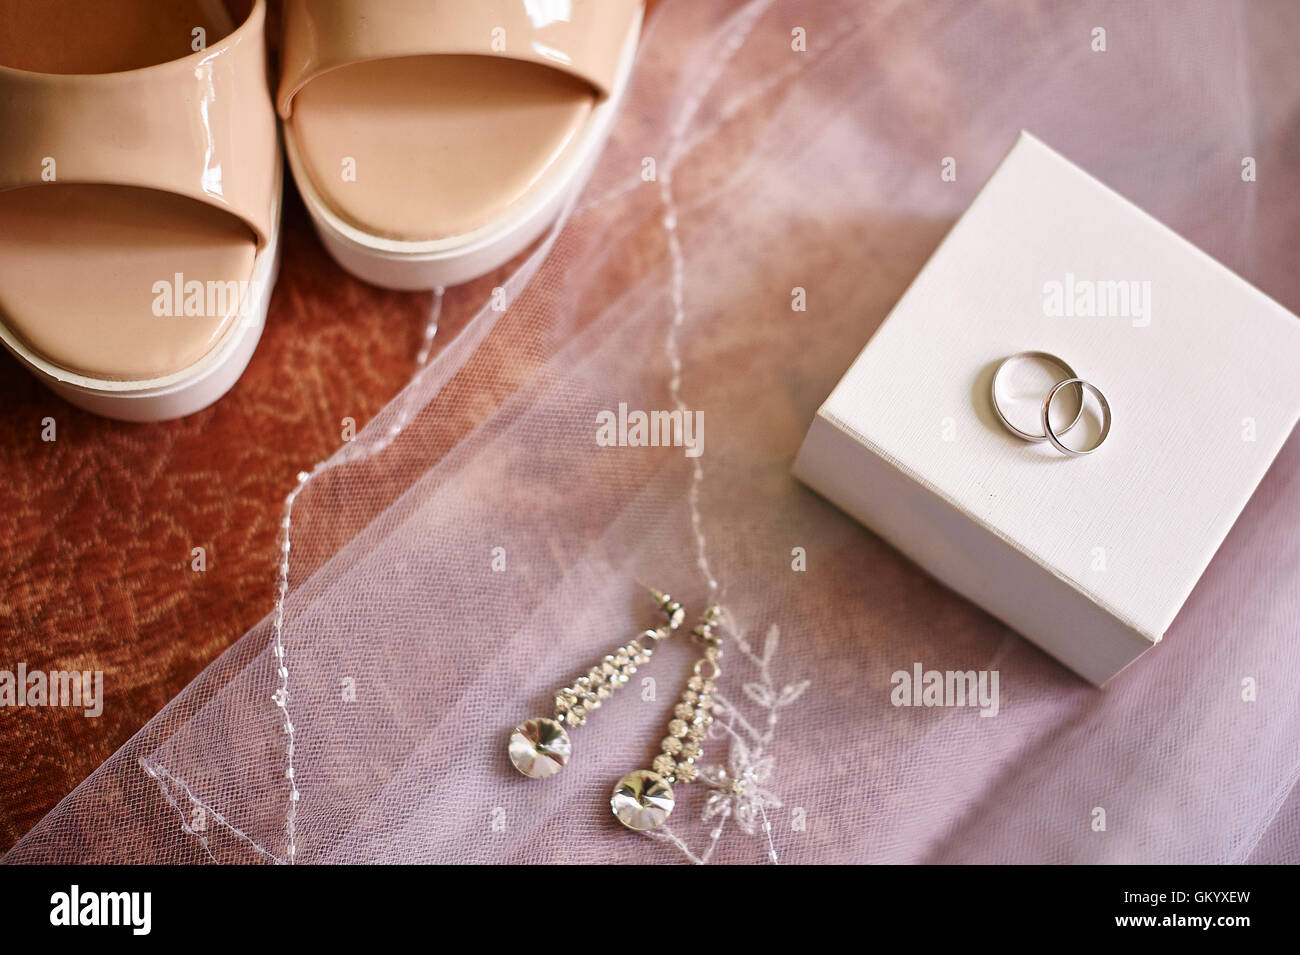 Wedding rings and earrings on a white veil of bride Stock Photo